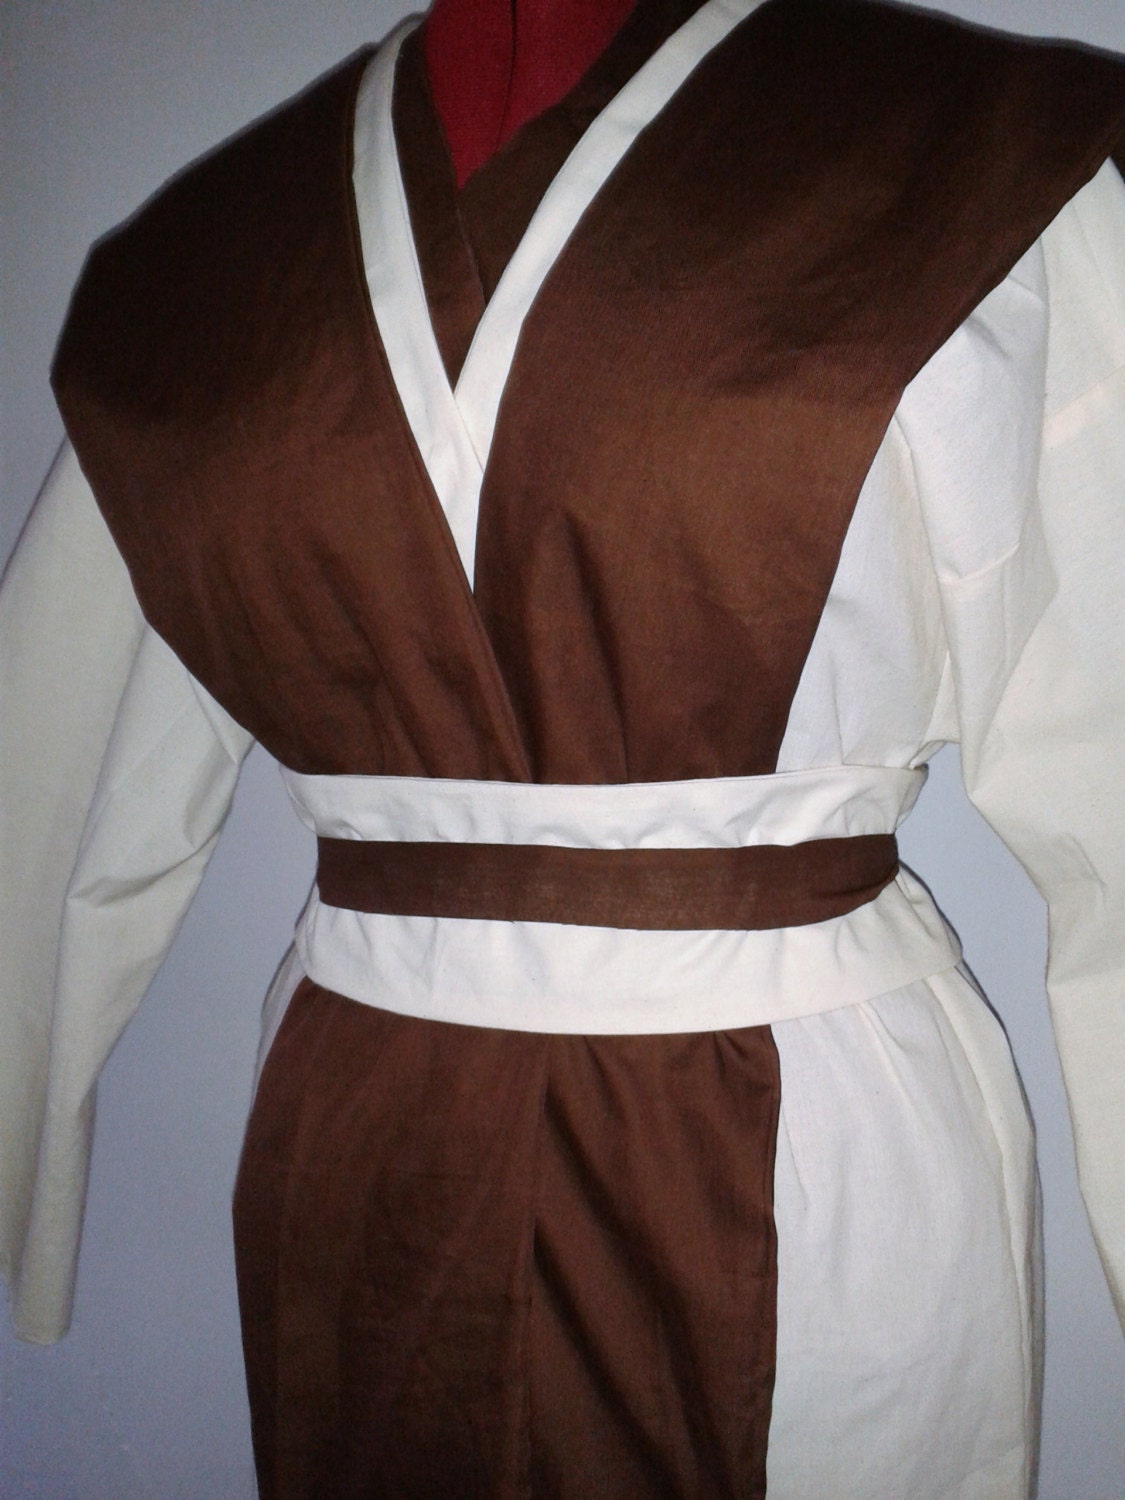 Star Wars costume and cosplay worldwide shipping Jedi robe set handmade in any size